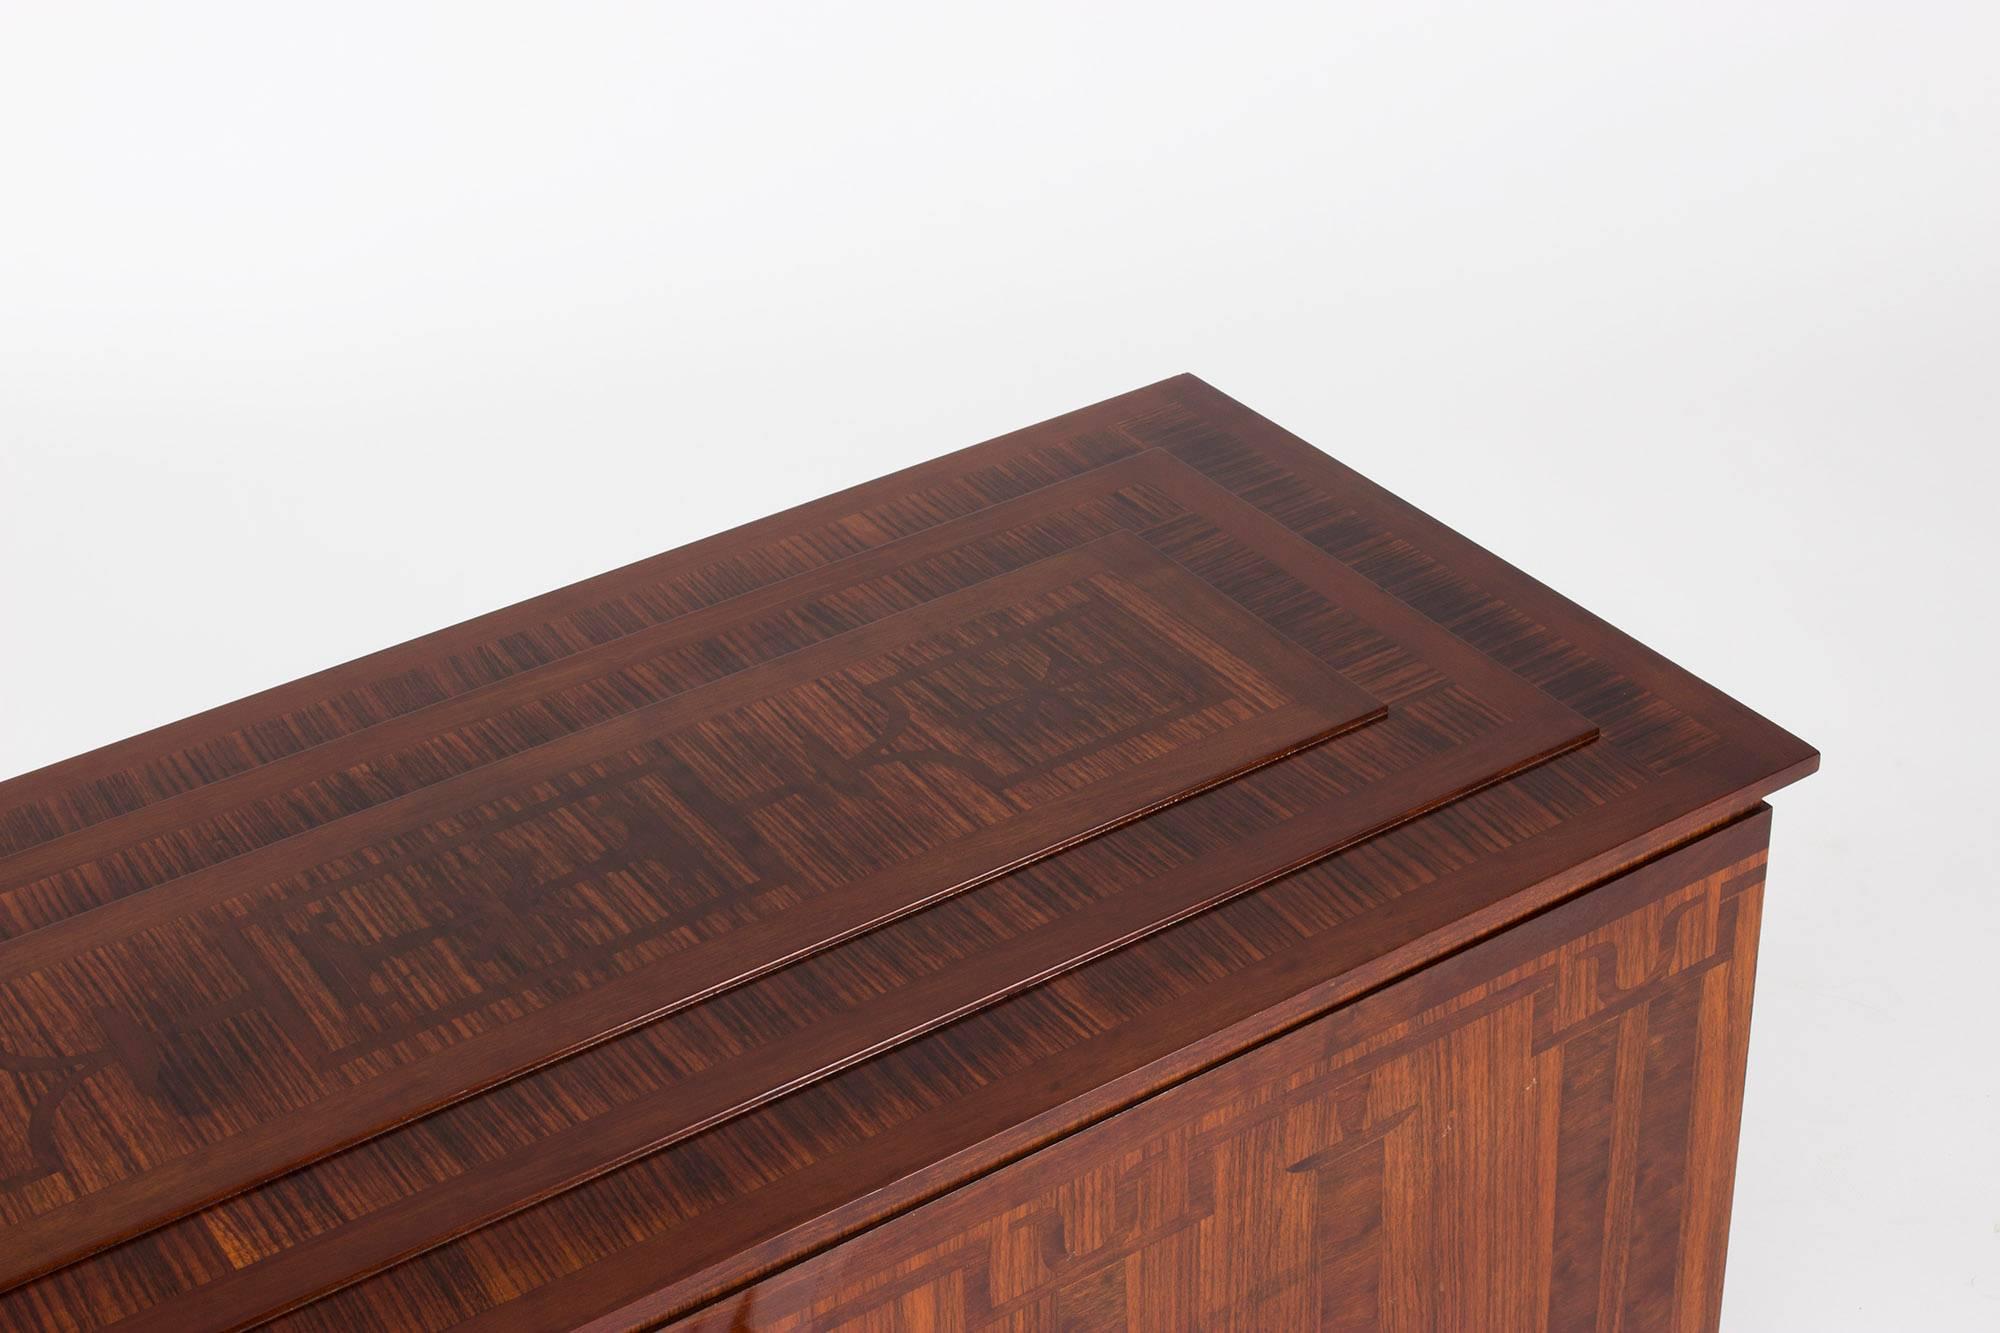 Early 20th Century Art Deco Chest with Inlays by Carl Malmsten